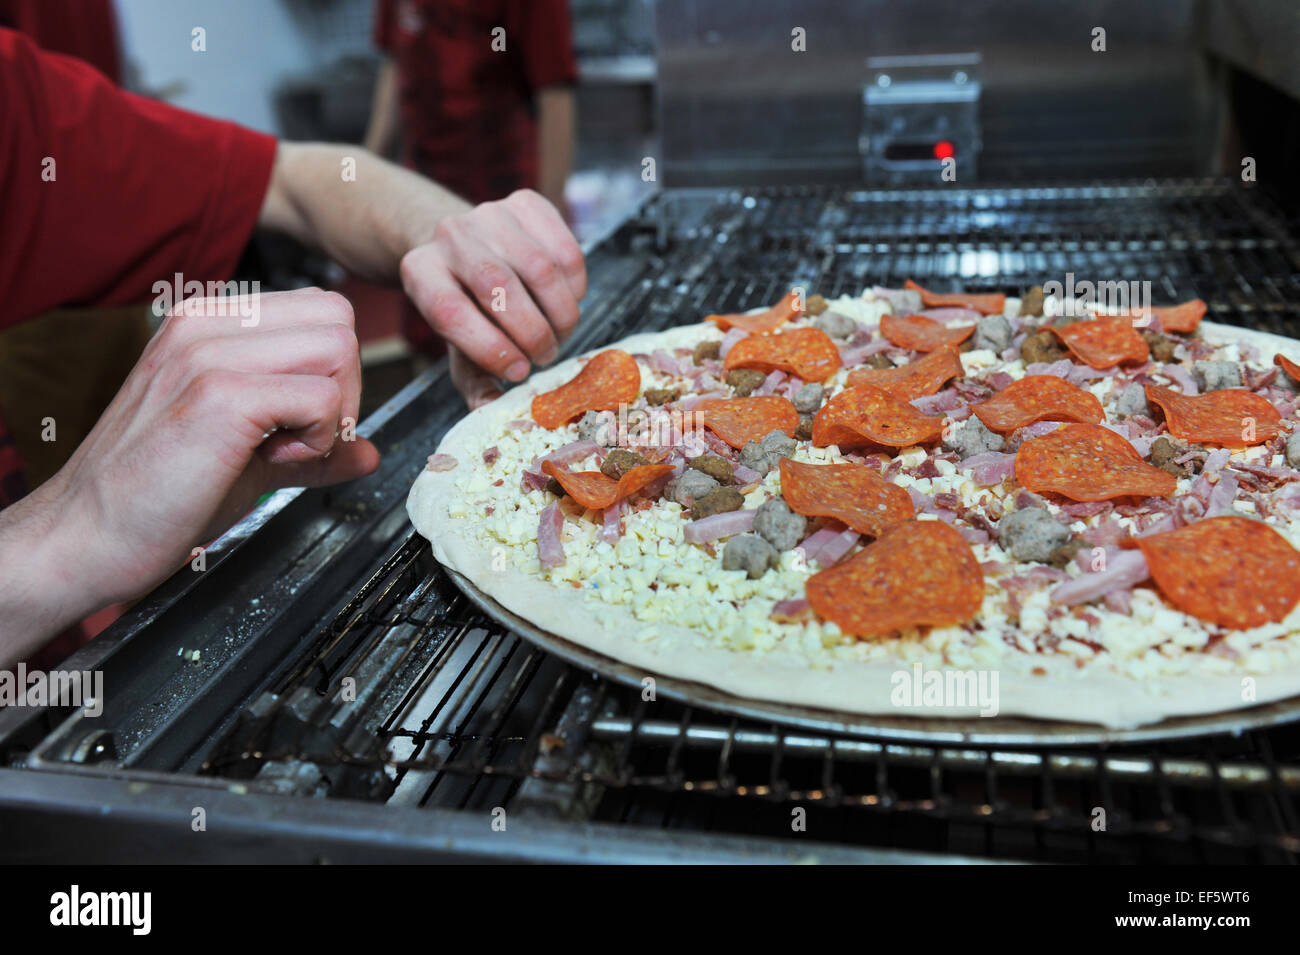 Close up making Pizzas in a takeaway, Leeds loading the pizza into the conveyor belt oven. Stock Photo